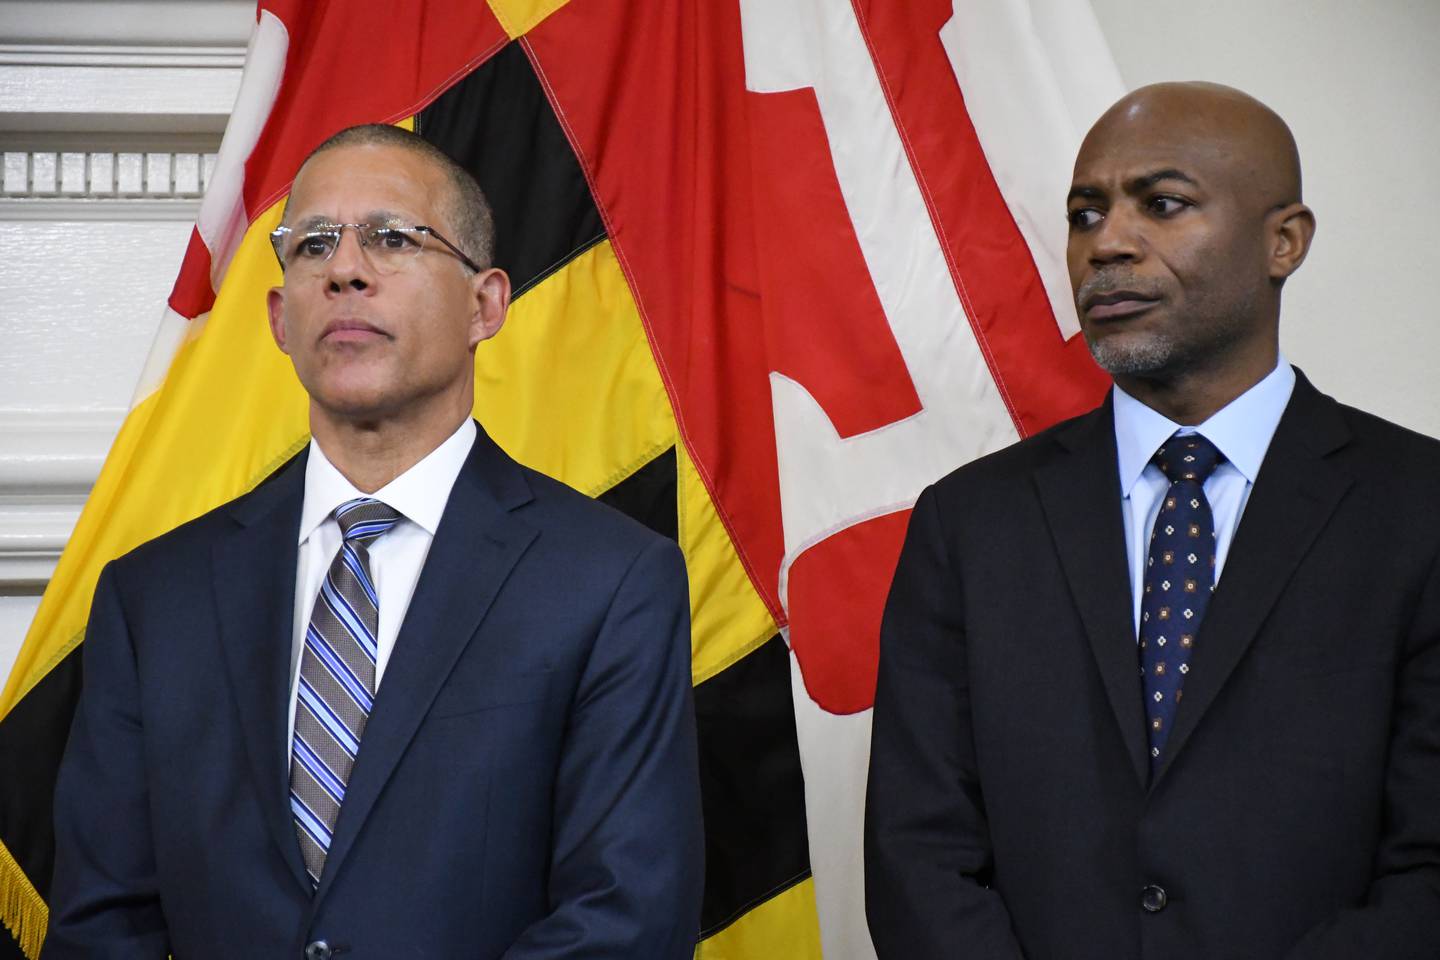 Maryland Attorney General Anthony Brown, left, and U.S. Attorney for Maryland Erek Barron listen during a press conference at the State House in Annapolis on Thursday, Jan. 19, 2023.+